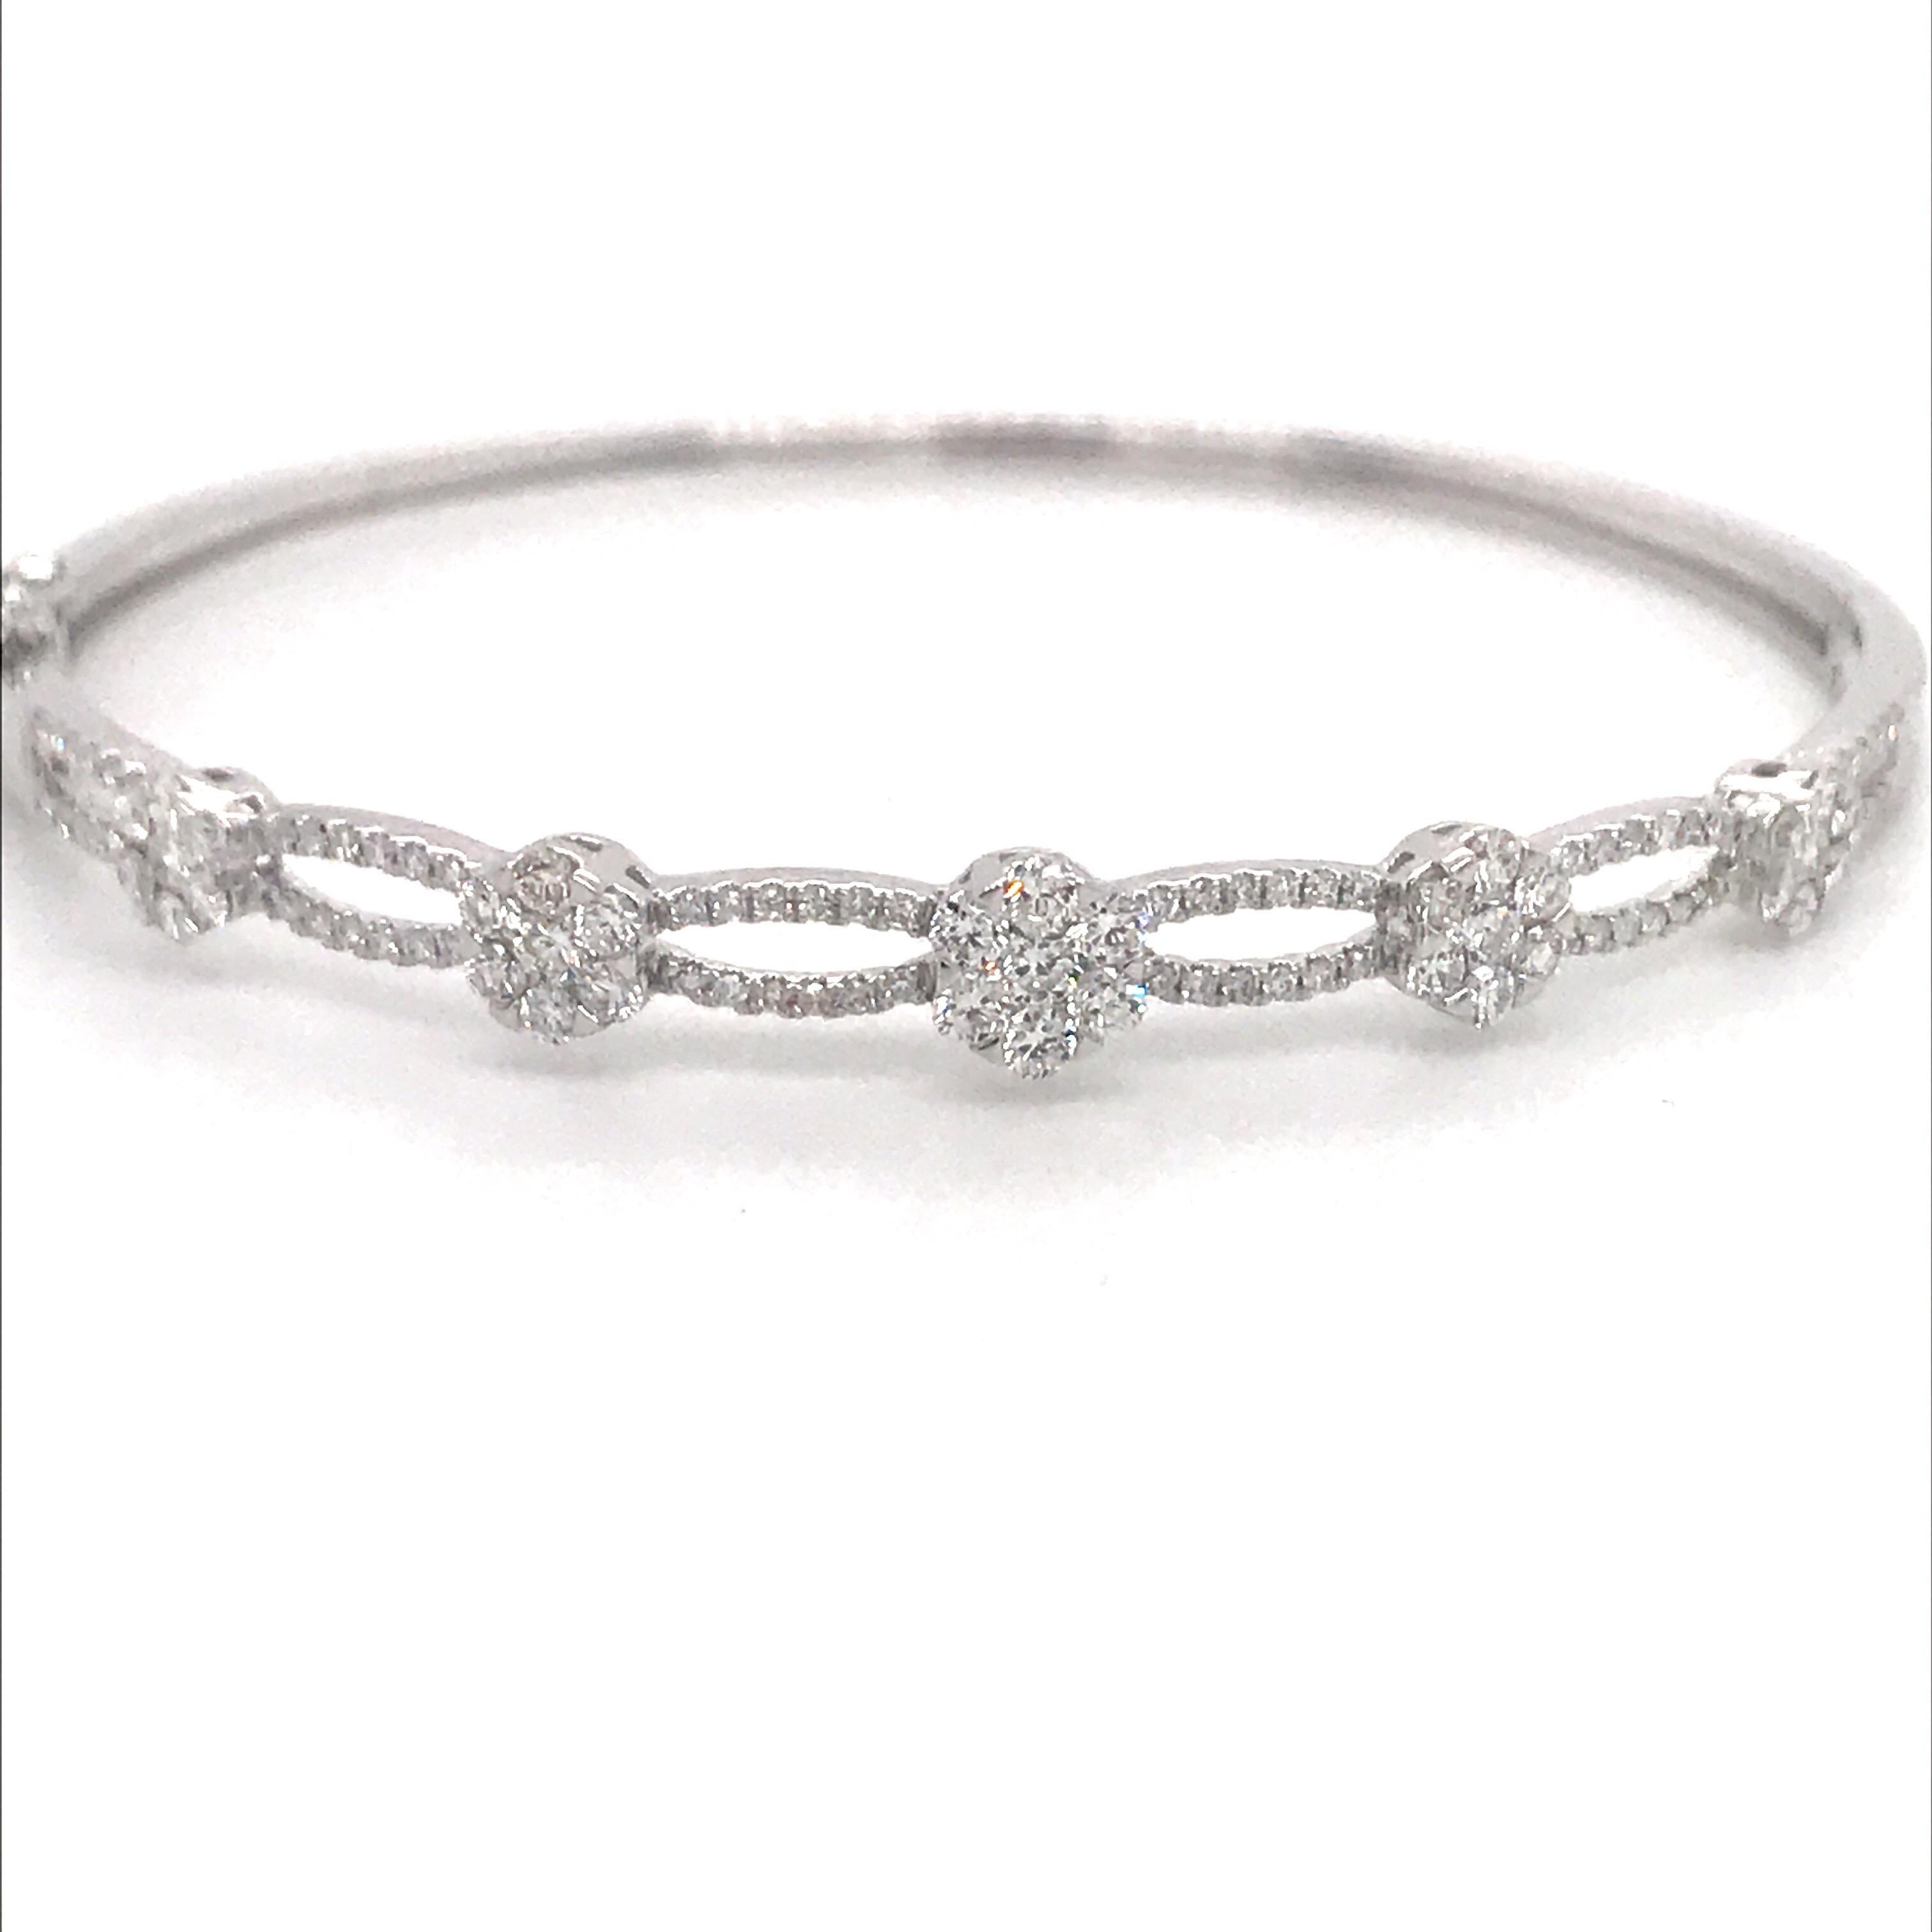 18K White gold bangle featuring graduated diamond floral & swirl design weighing 1.24 carats.
Color G-H
Clarity SI